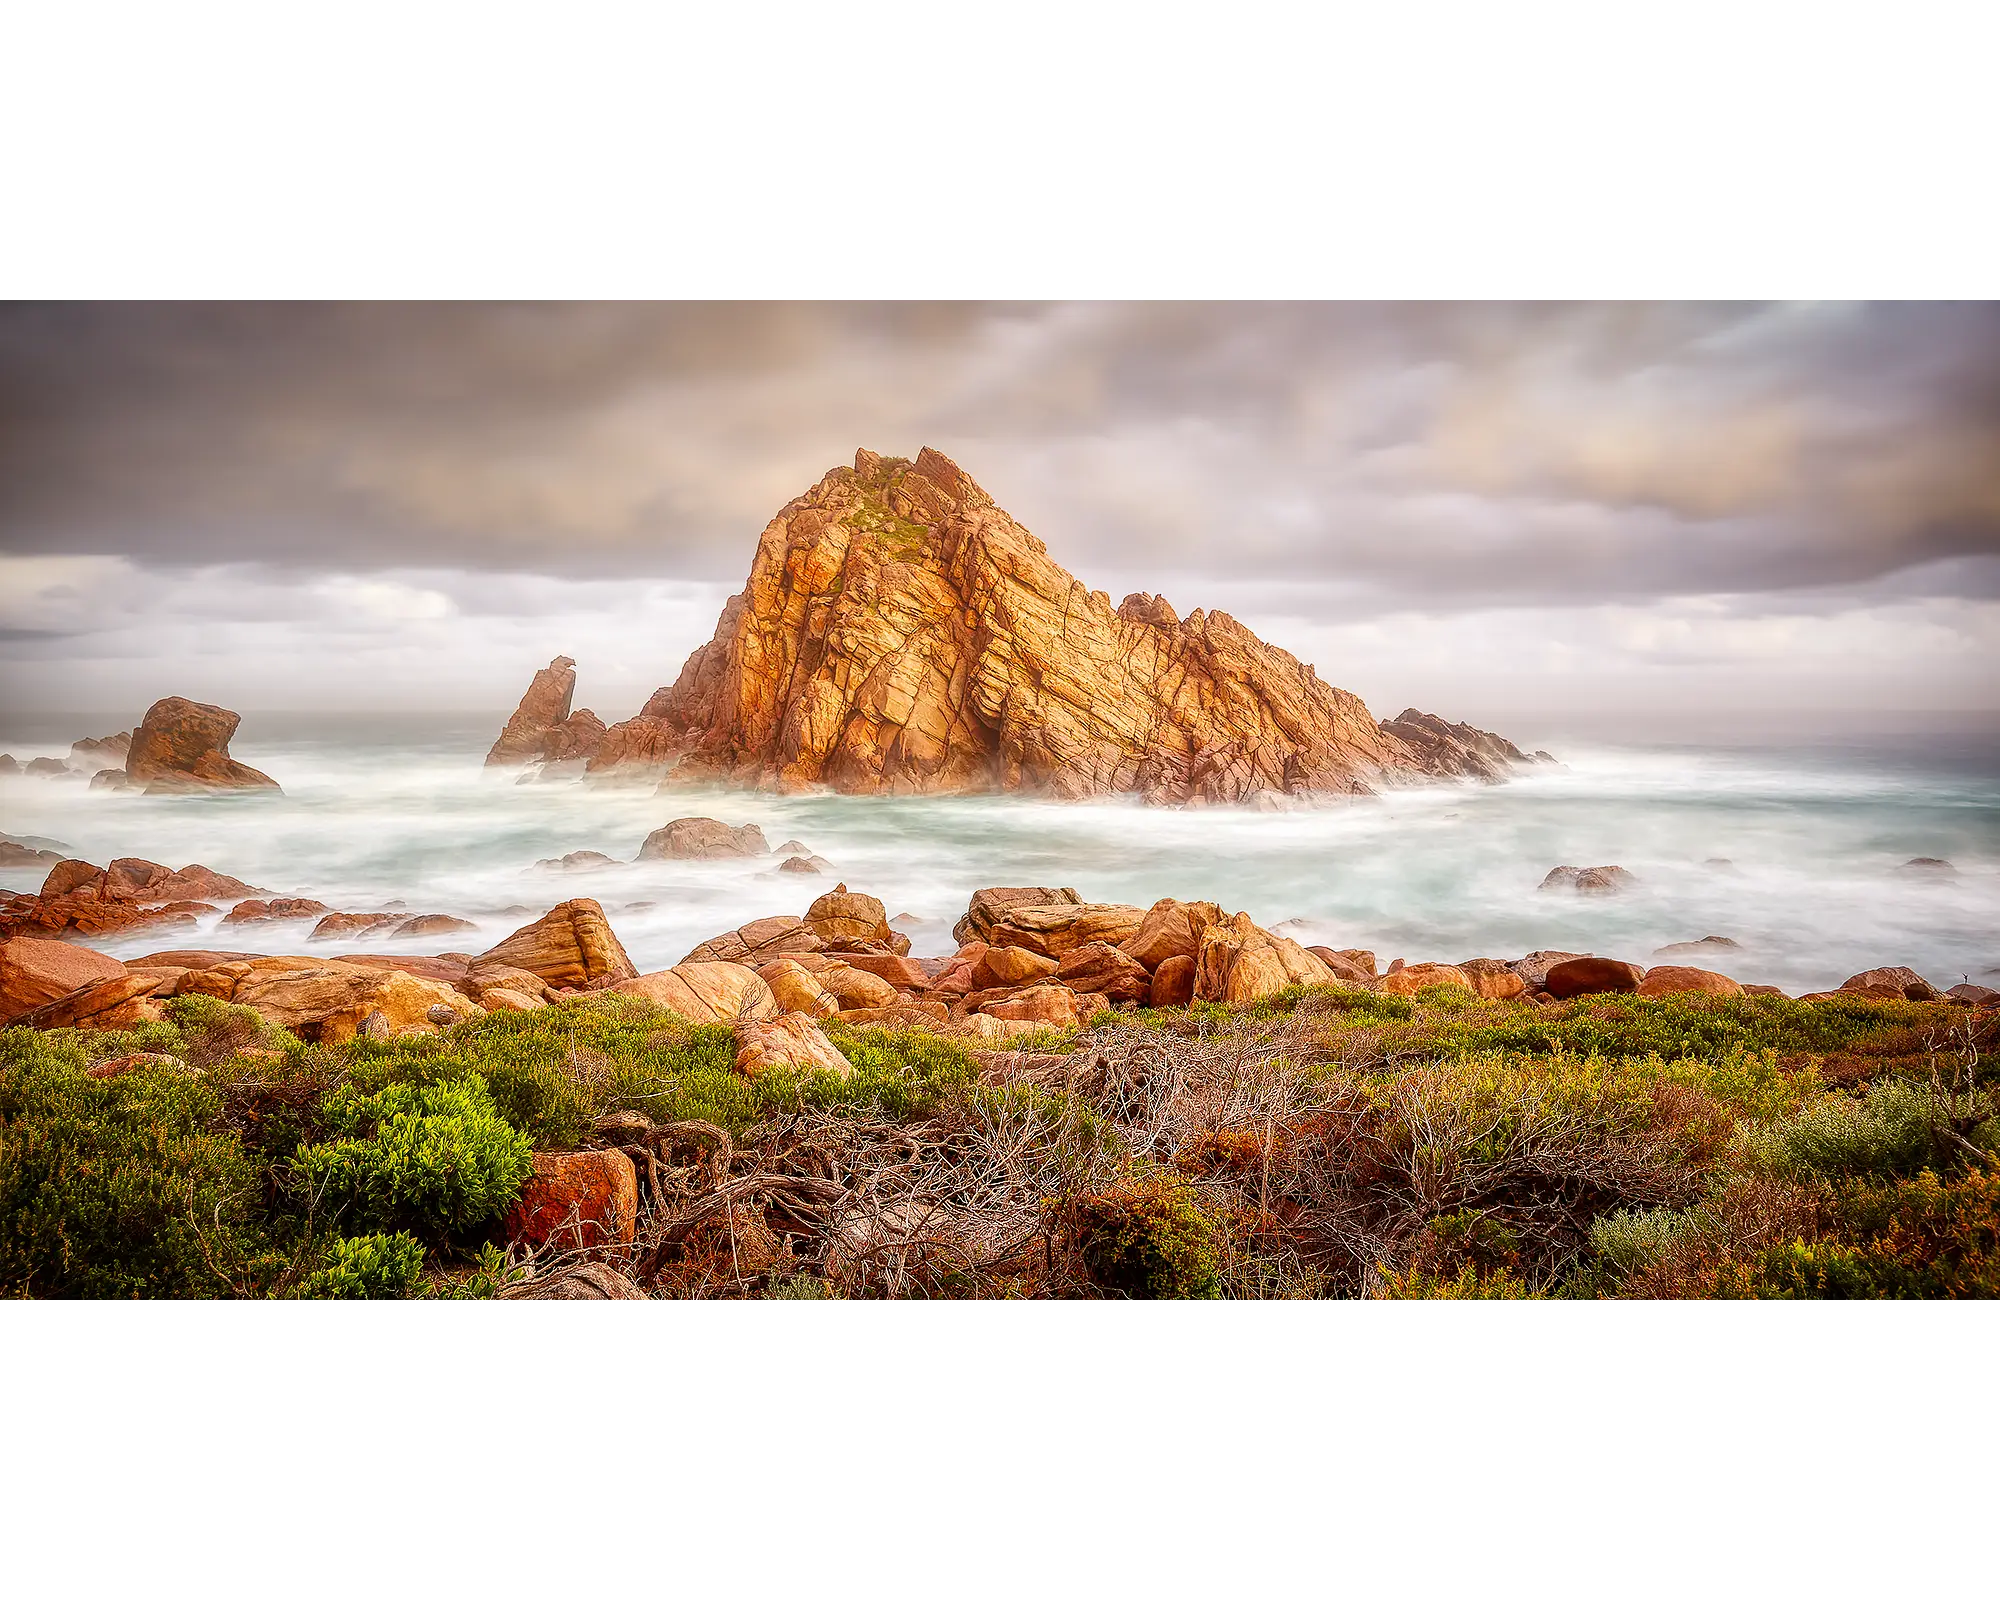 Icon Of The South West - Sugarloaf Rock, Leeuwin Naturaliste National Park, Western Australia.